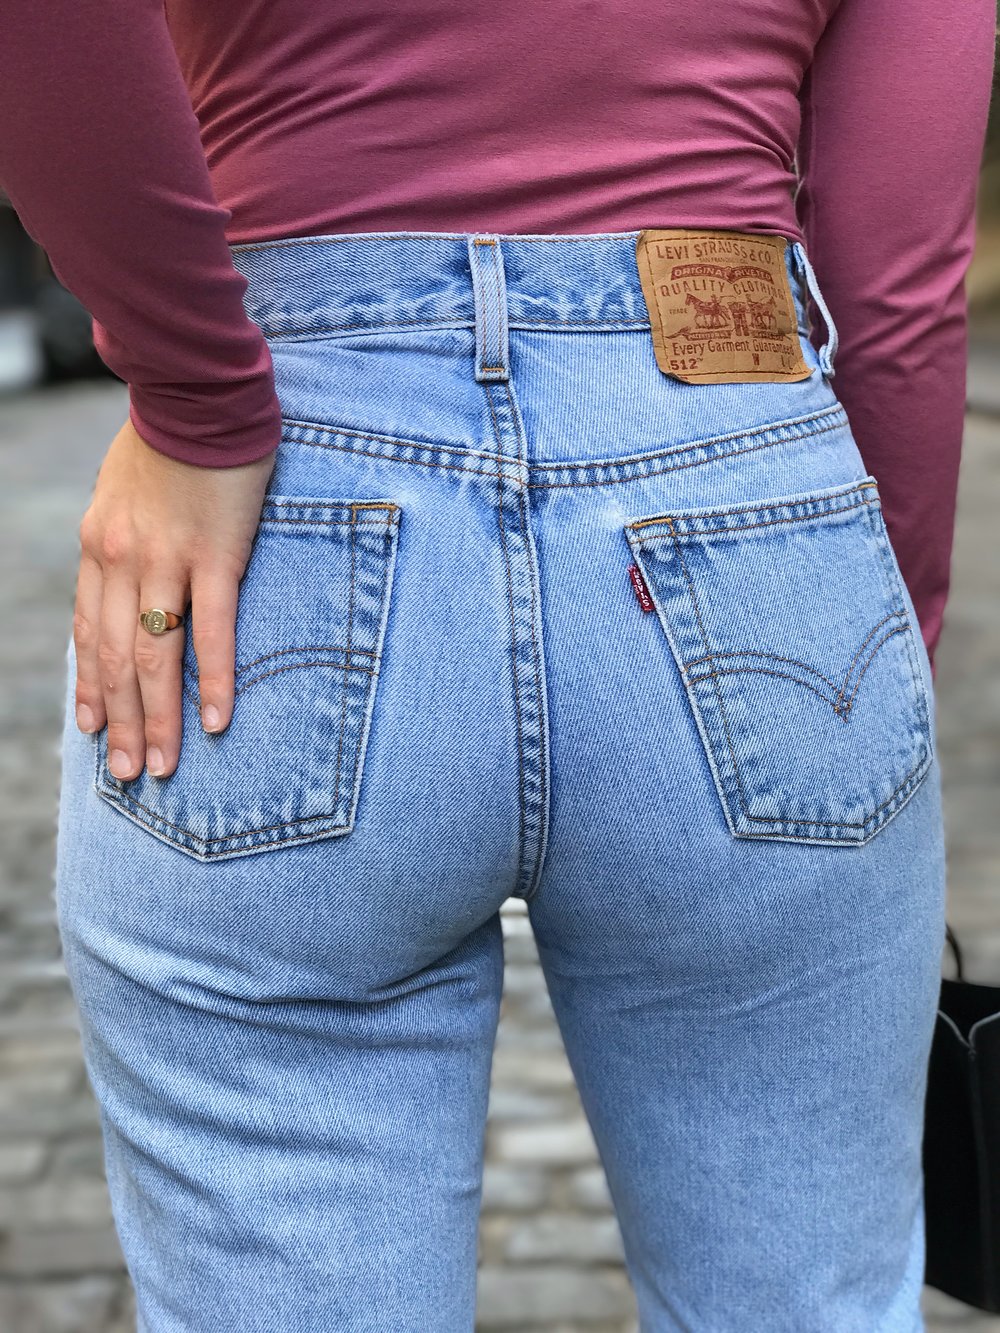 HOW TO SHOP VINTAGE JEANS WHEN PETITE & CURVY — Pear Project